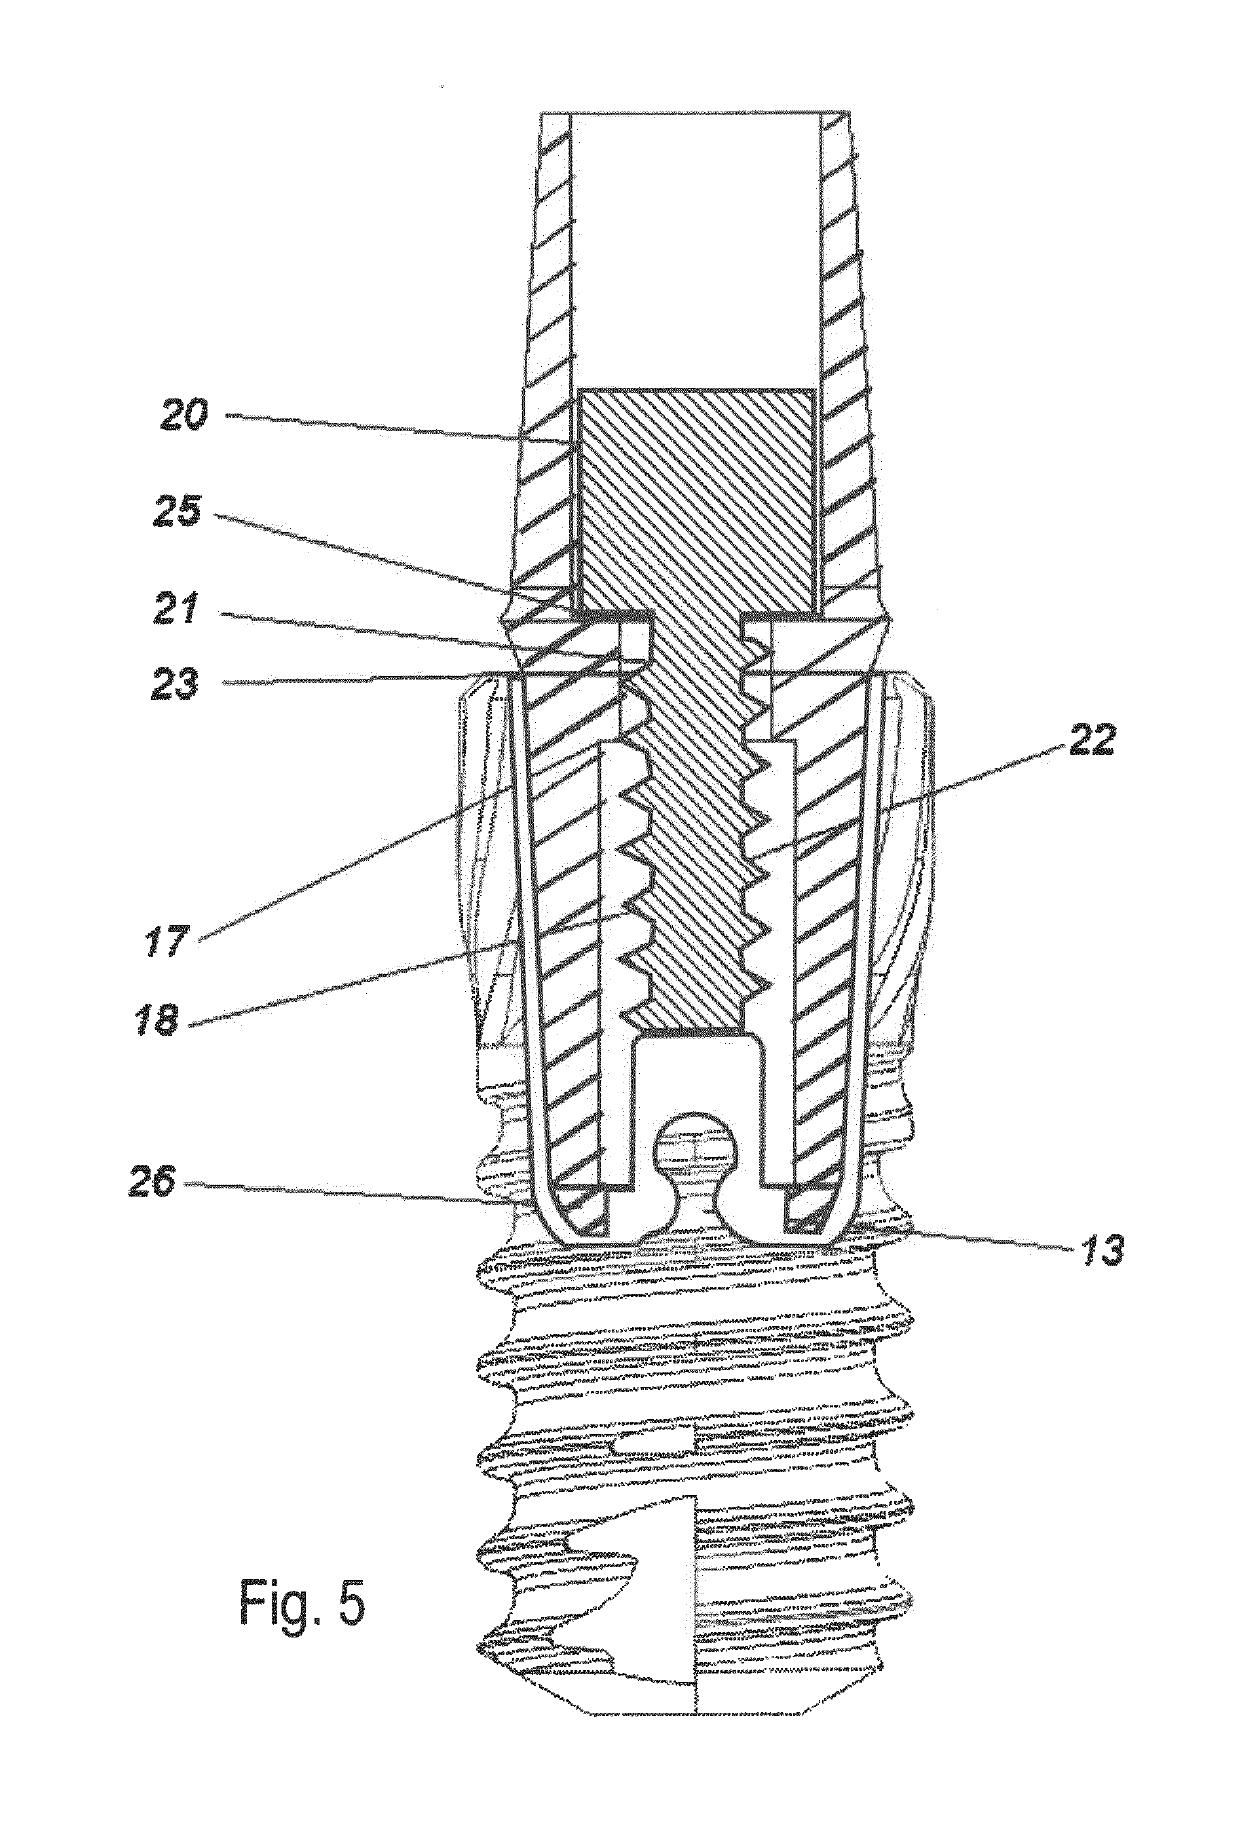 Dental insert for connecting a dental implant to a dental abutment